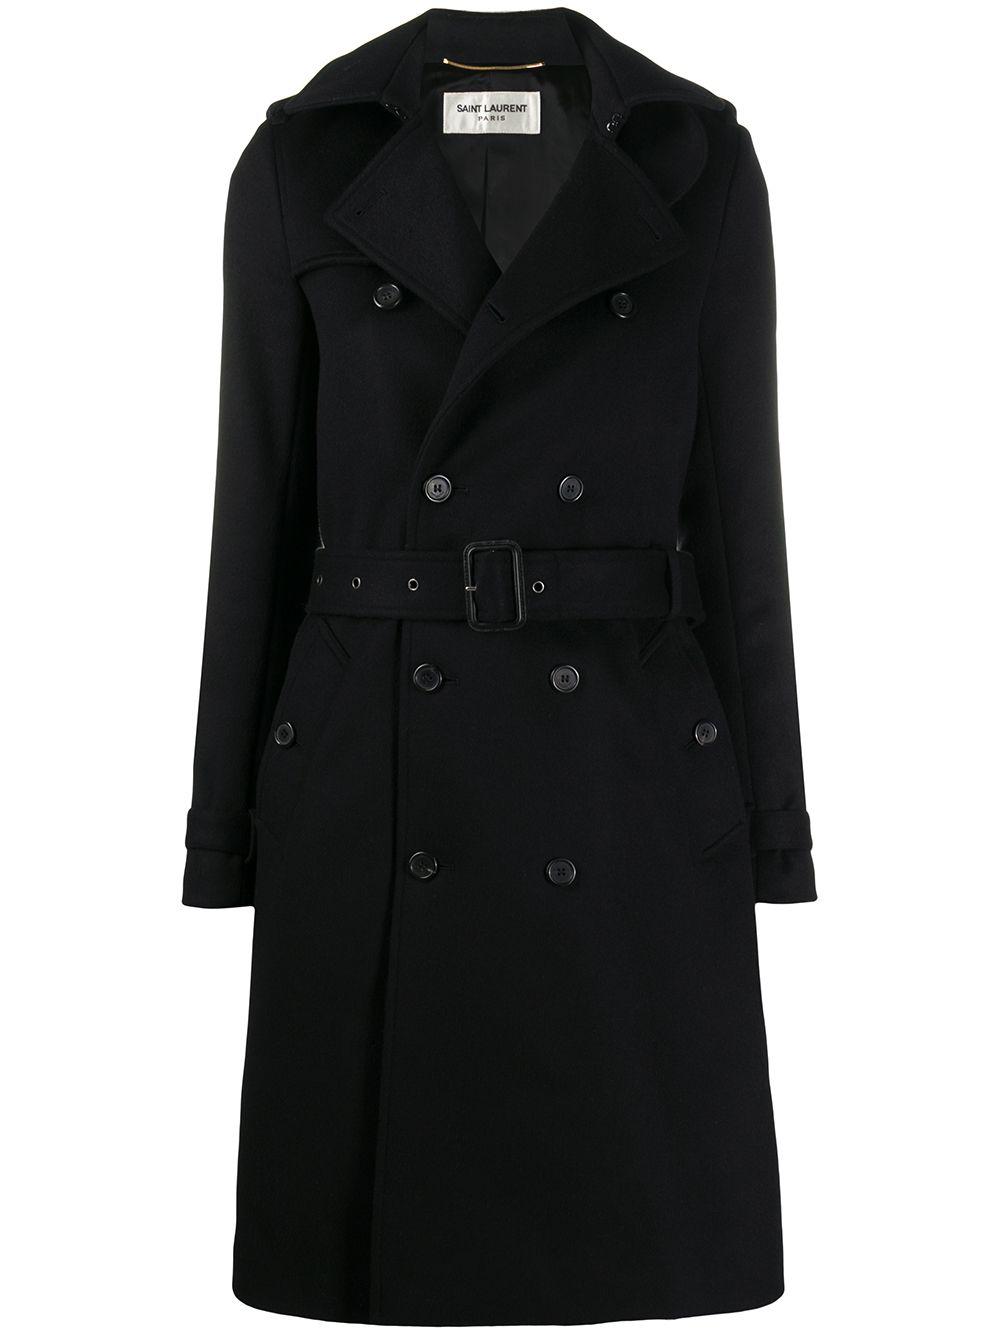 Saint Laurent Wool Double-breasted Belted Coat in Black - Lyst